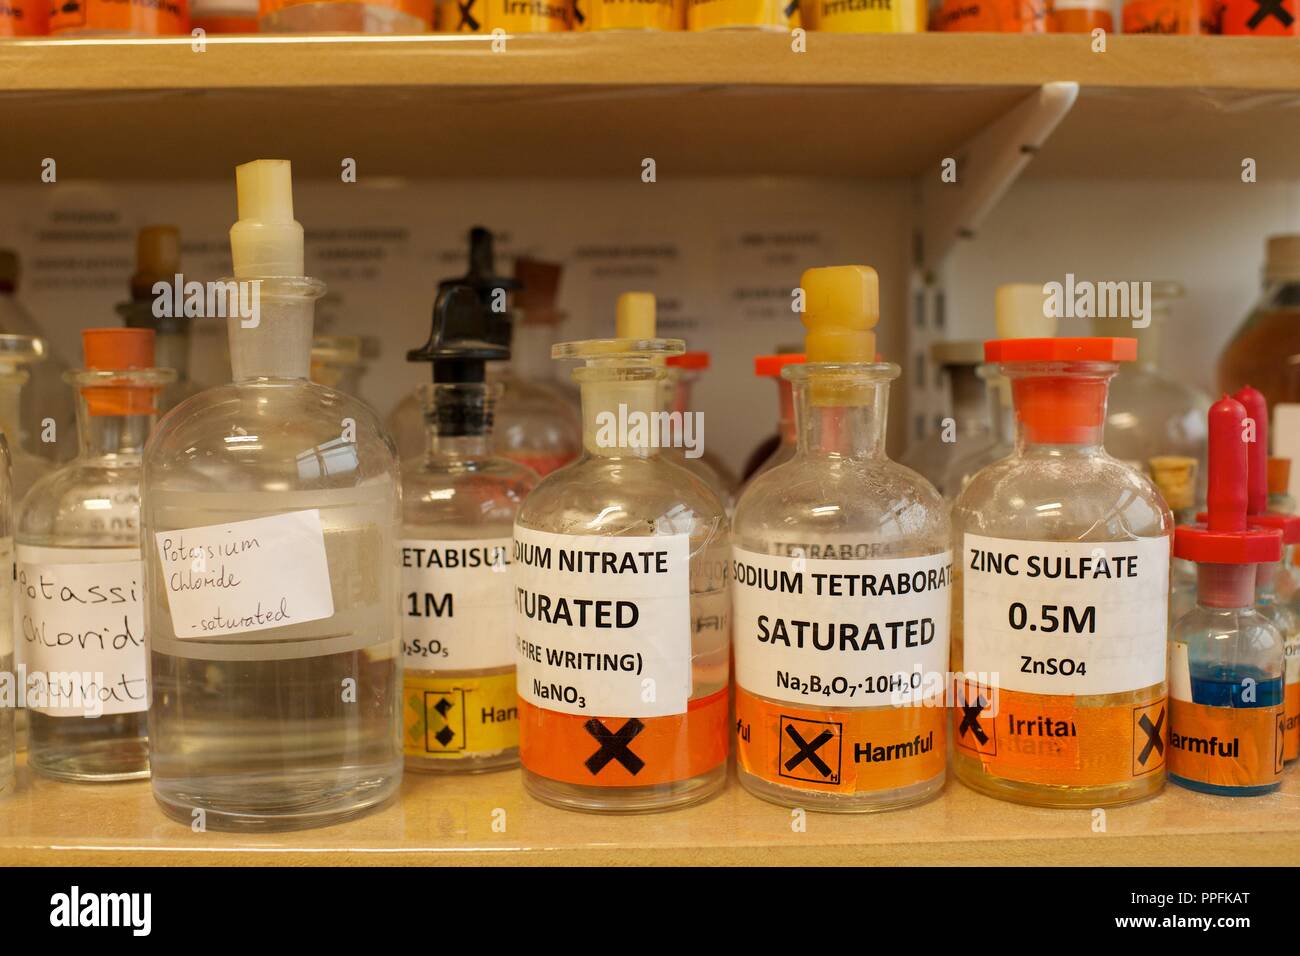 Academy Secondary school science equipment Chemicals Stock Photo